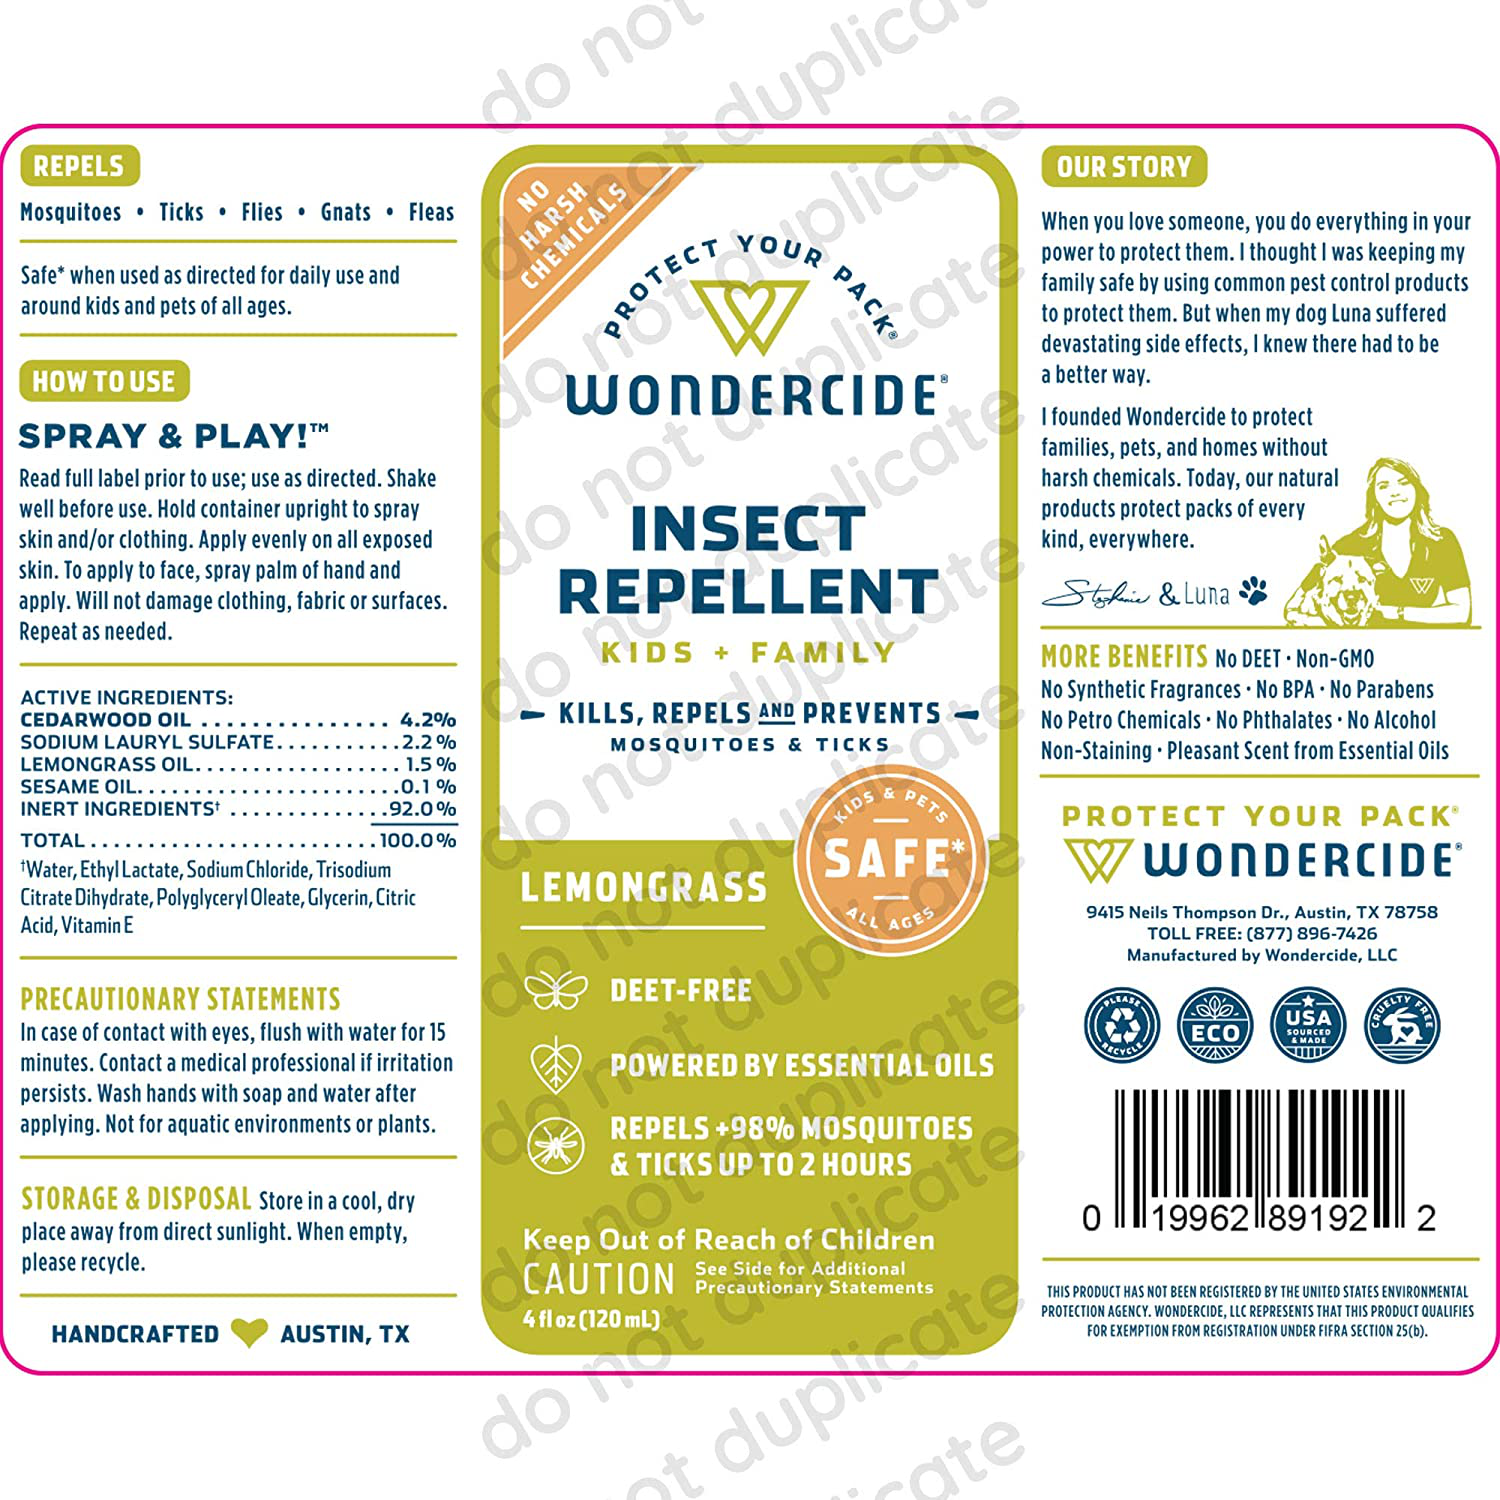 Wondercide - Mosquito, Tick, Fly, and Insect Repellent with Natural Essential Oils - DEET-Free Plant-Based Bug Spray and Killer - Safe for Kids, Babies, and Family - Cedarwood 2-Pack of 4 oz Bottle